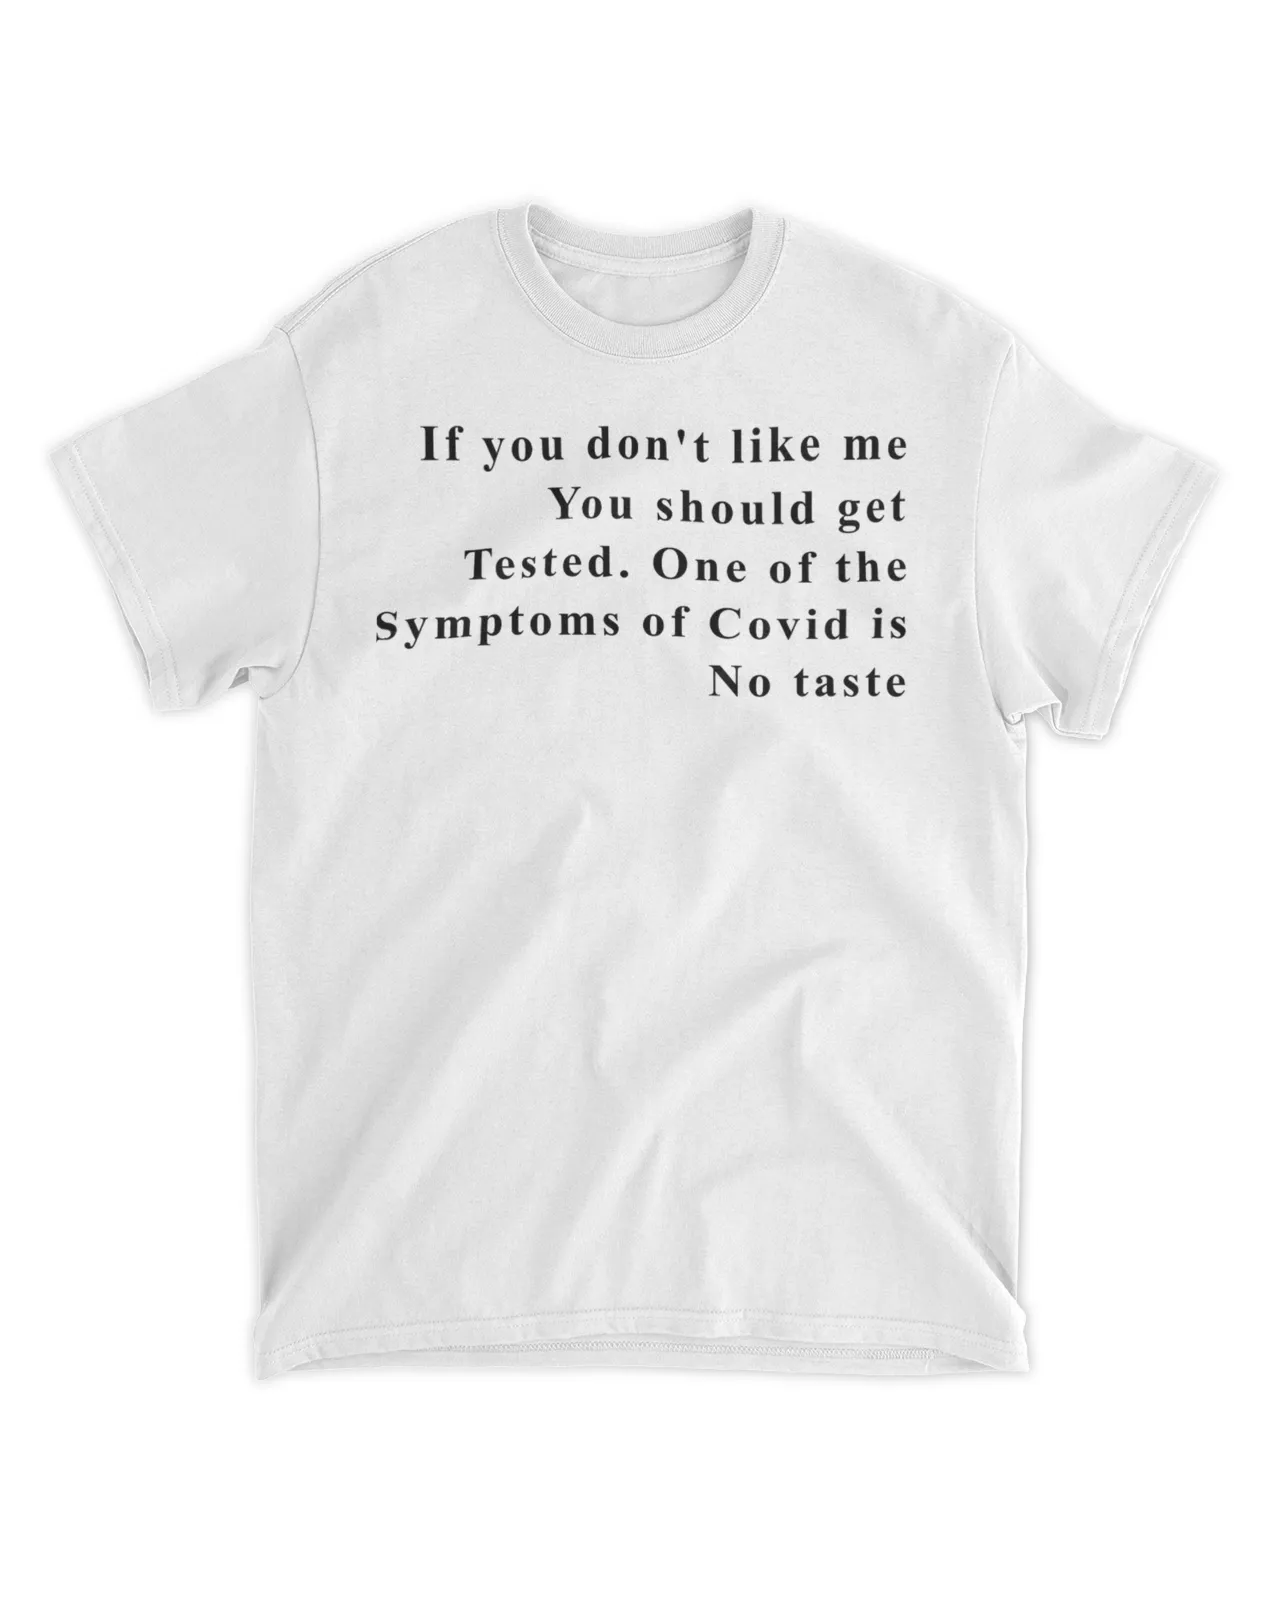  If you don't like me you should get tested one of the symptoms of covid is no taste shirt